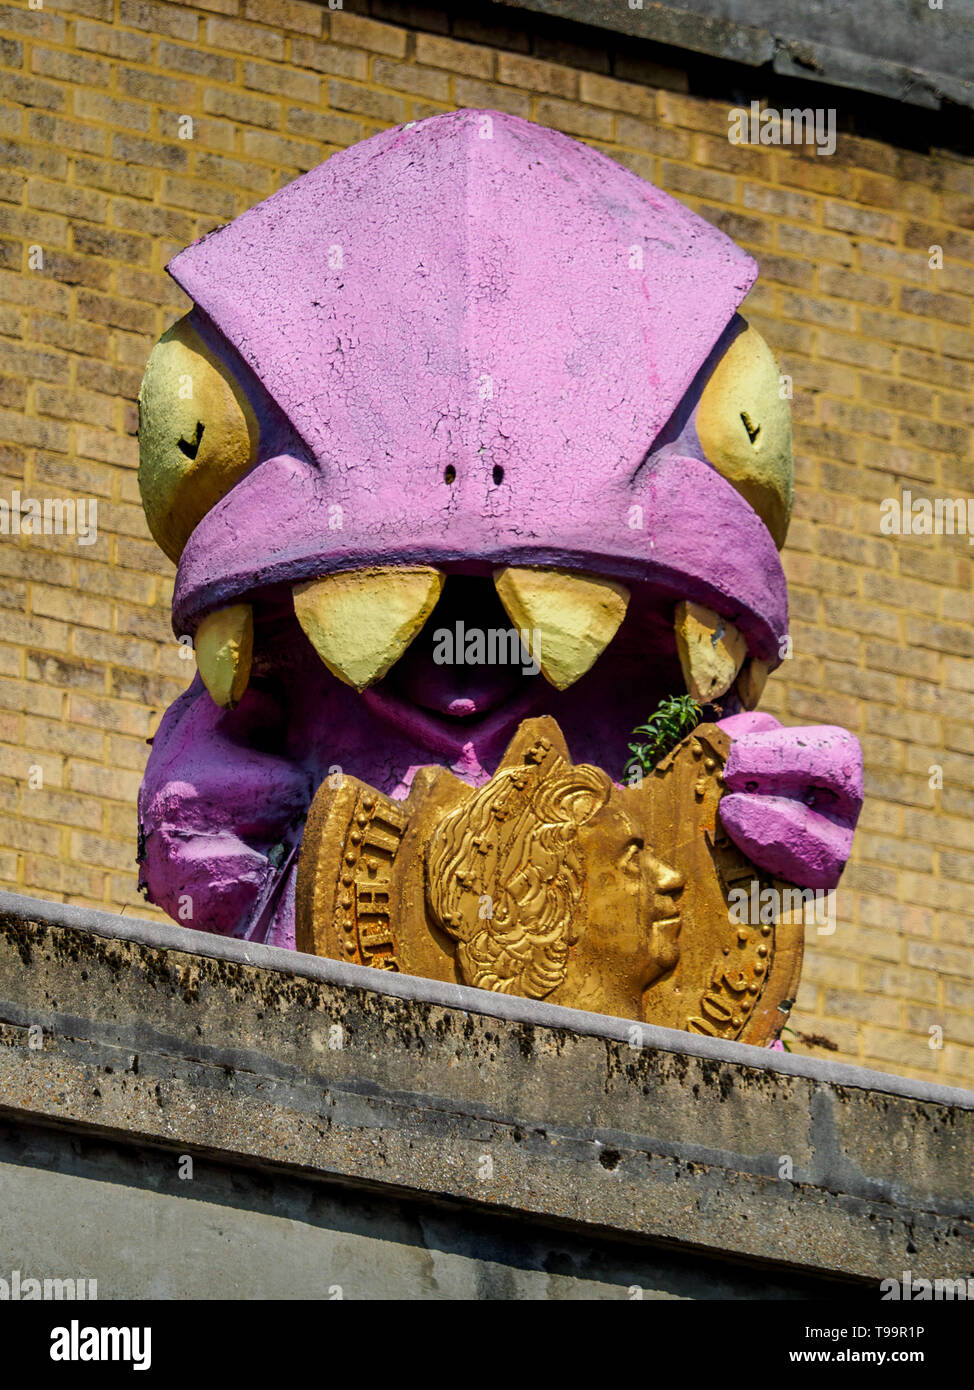 UK Inflation British Inflation - a monster eats away at a pound coin, Truman Brewery, East London. Credit Crunch Monster (Crunchy) by Ronzo 2009. Stock Photo